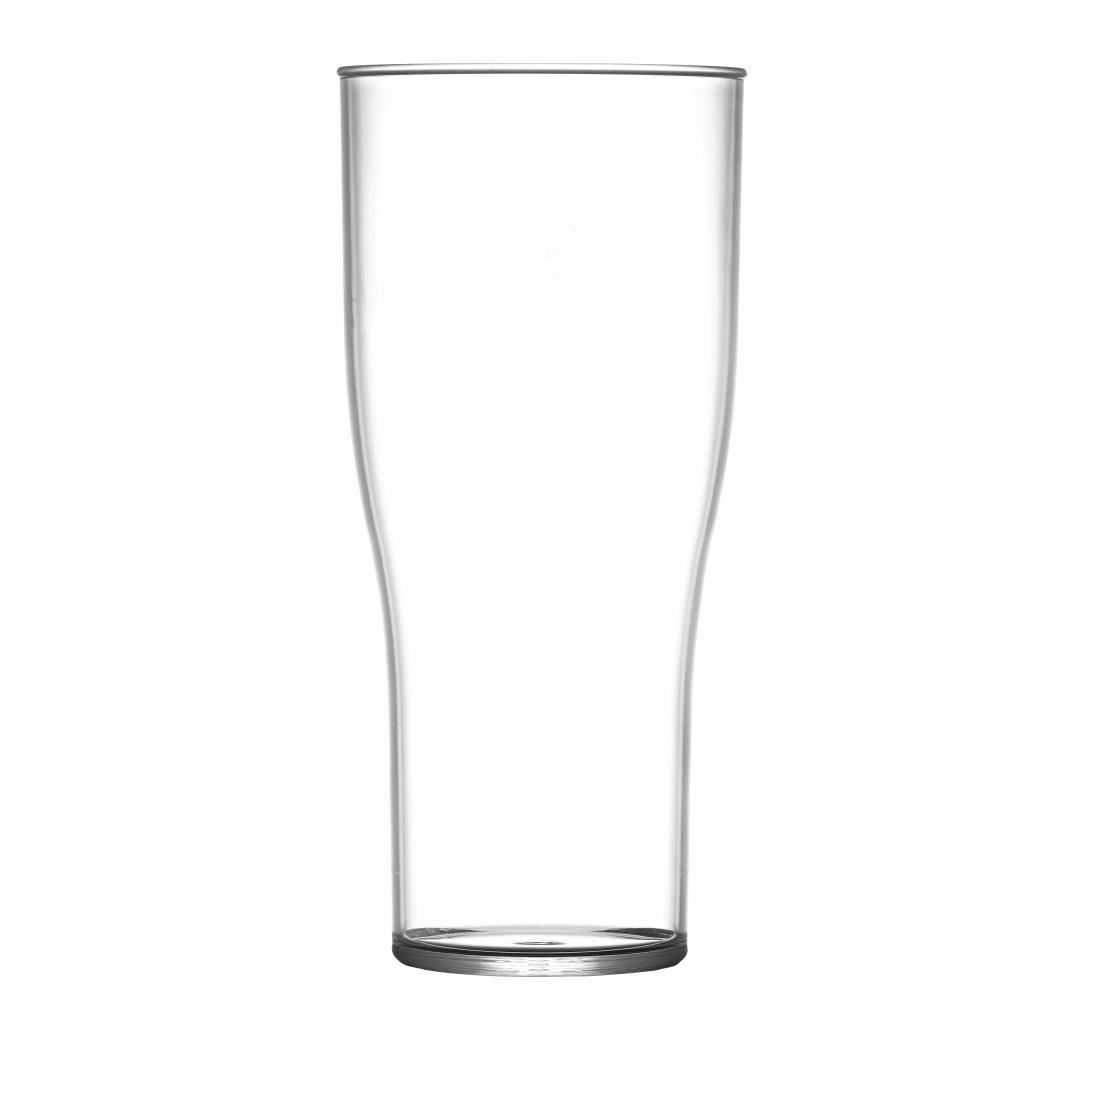 BBP Polycarbonate Nucleated Pint Glasses CE Marked (Pack of 48) - U403  - 1